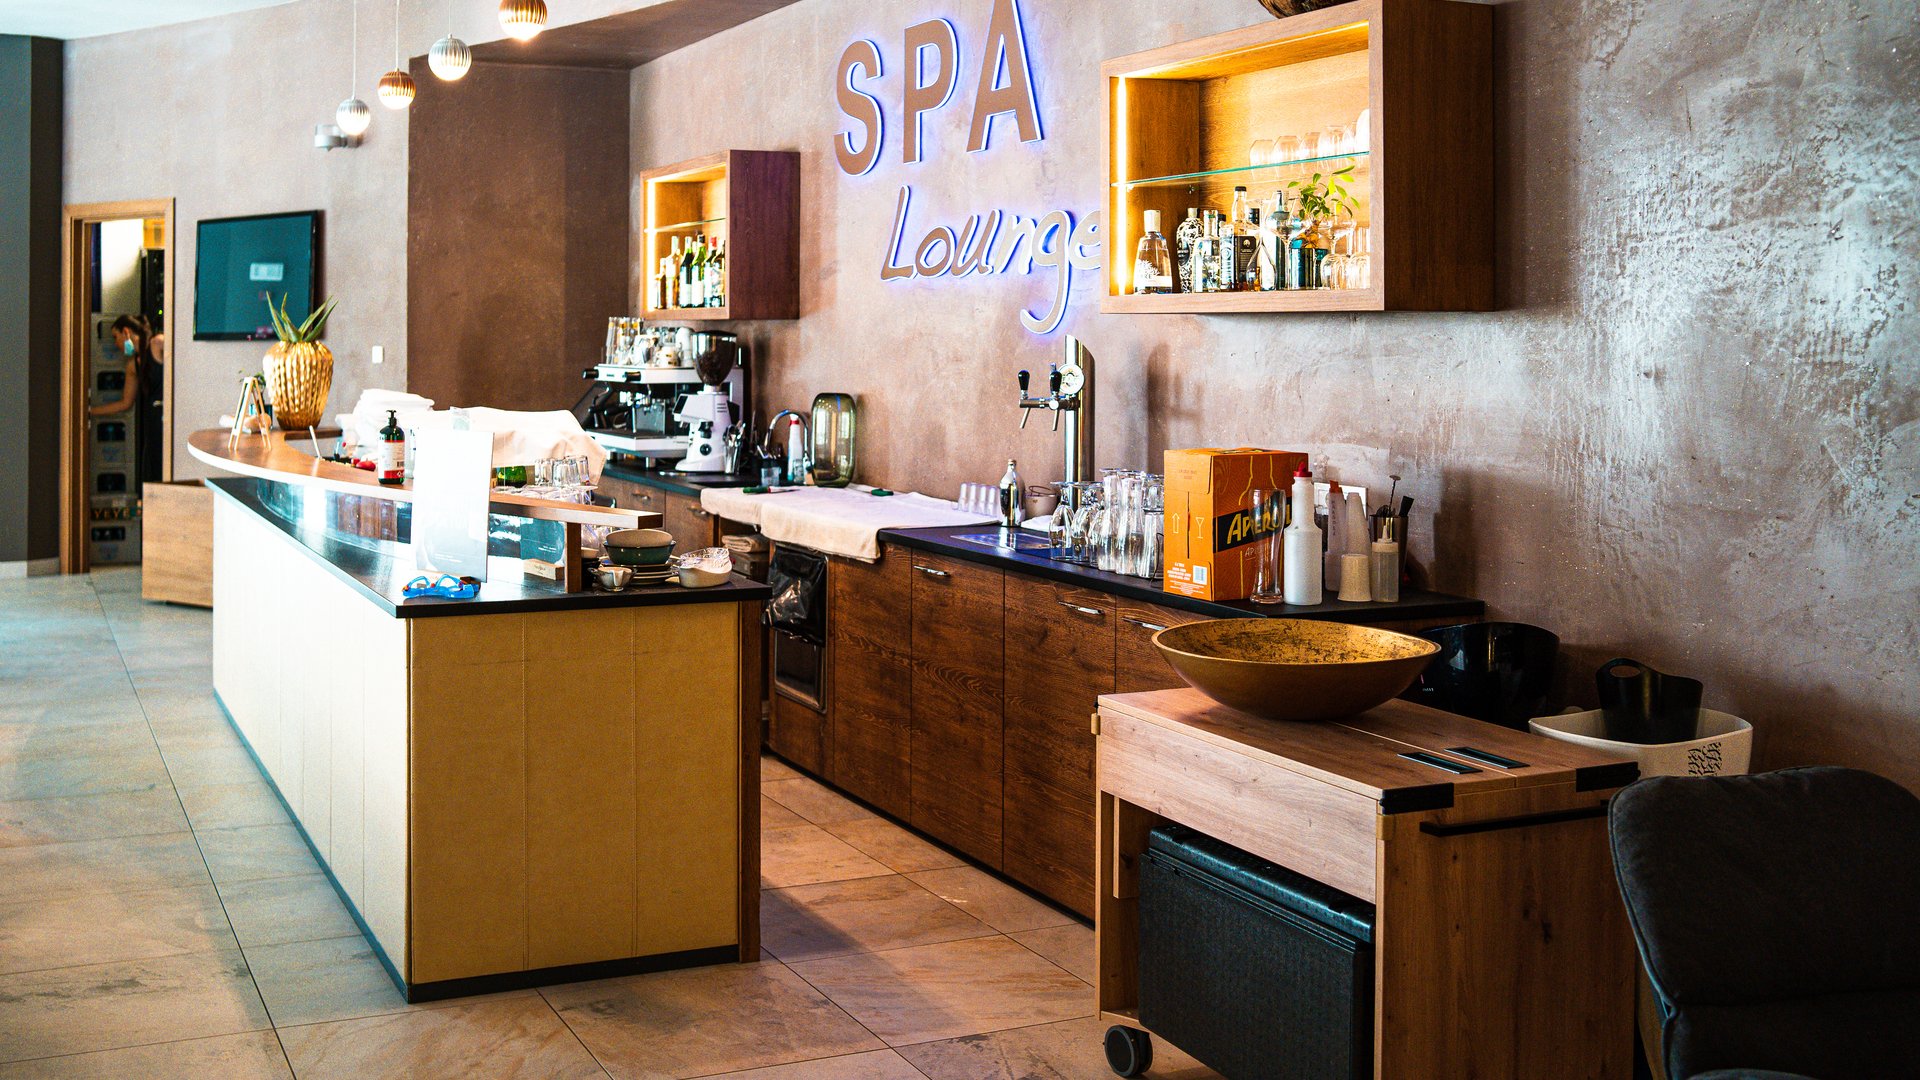 The luxury hotel in South Tyrol with a spa lounge